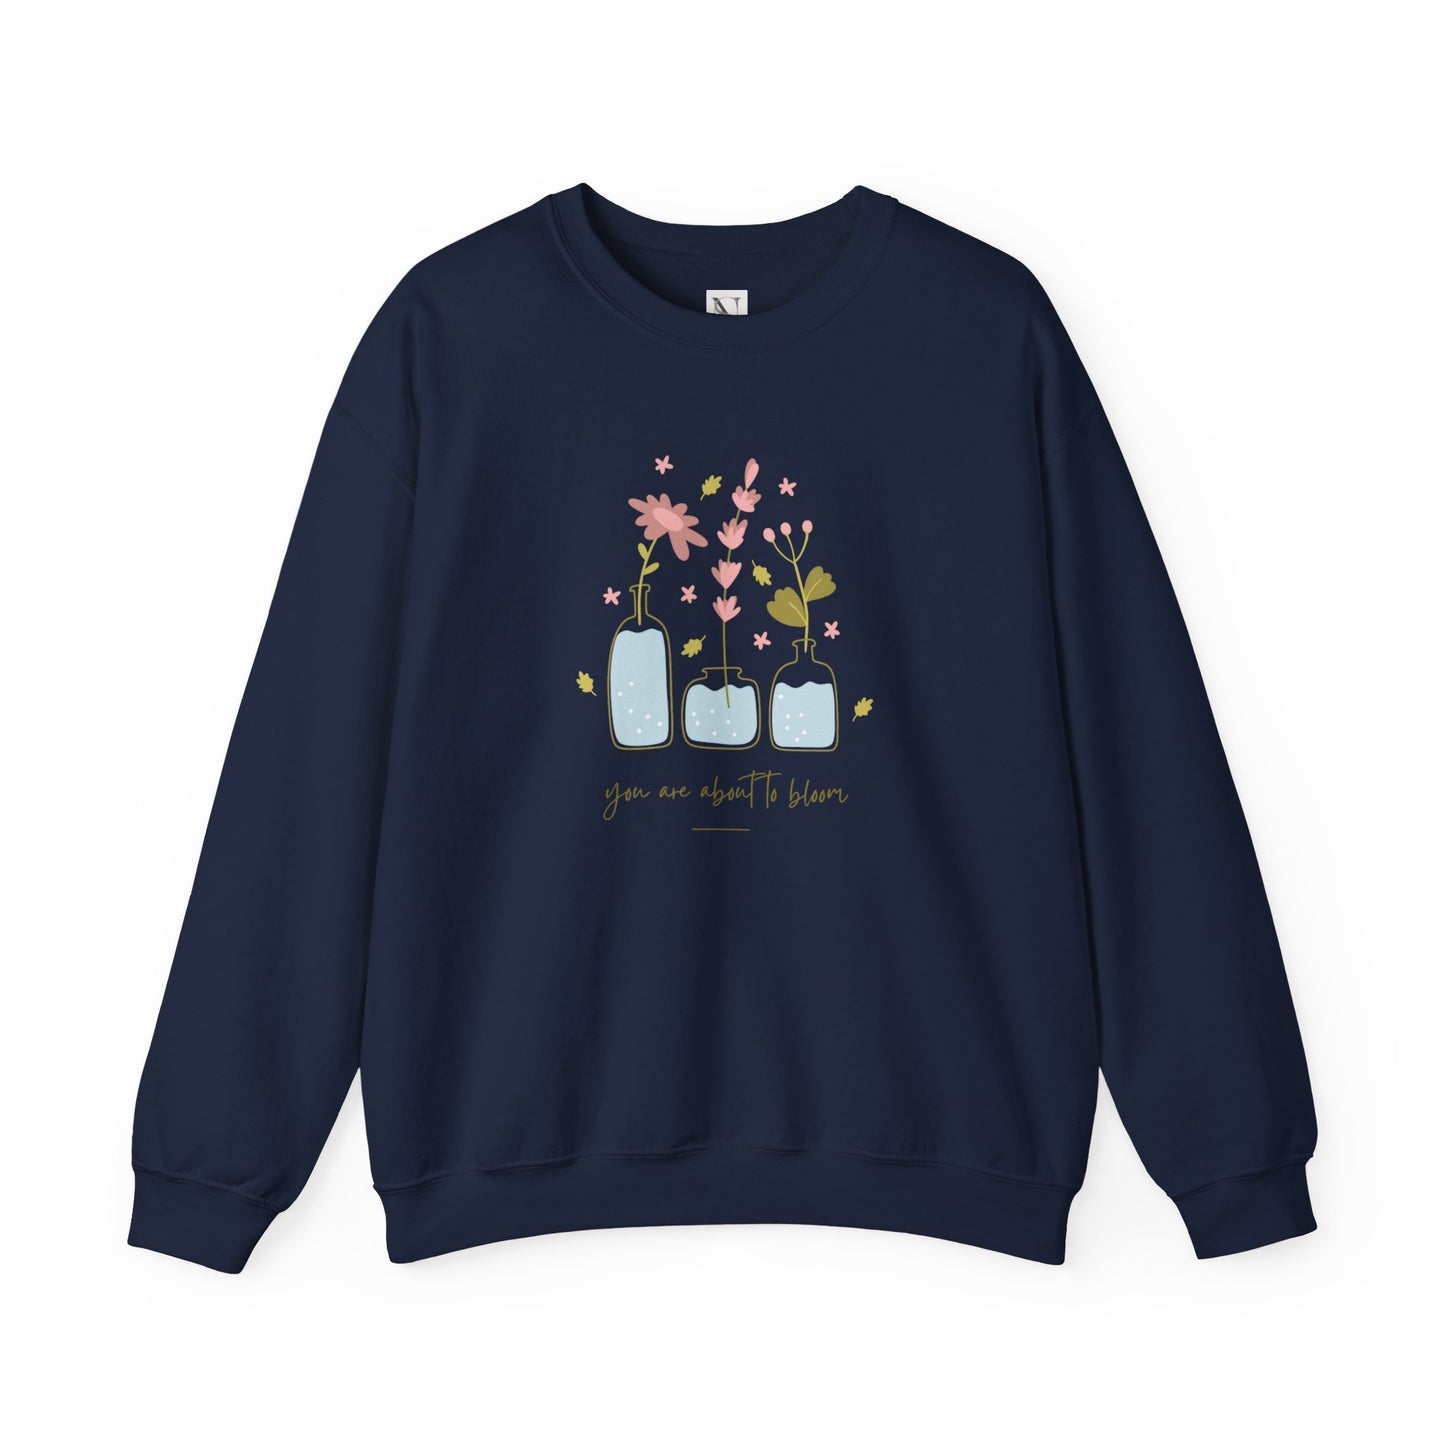 You are about to Bloom, Crewneck Sweatshirt